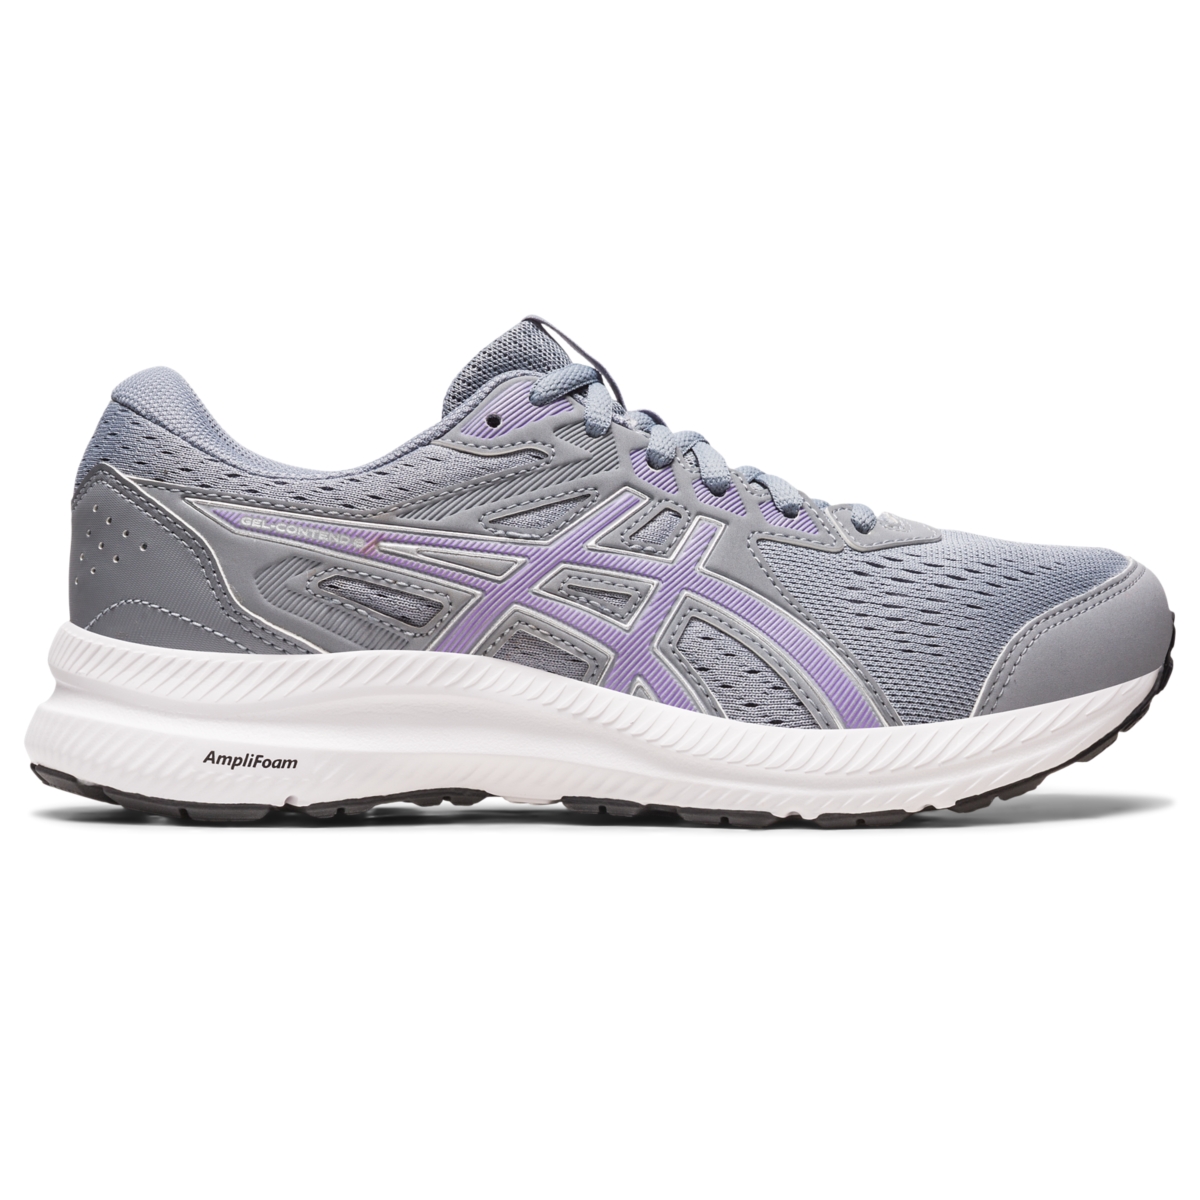 Gel contend 8. ASICS Gel contend 8. ASICS Gel contend 6. Gel-contend 8 ASICS Color: Rain Forest/White. Gel-contend 8 Piedmont Grey/Frosted Rose.